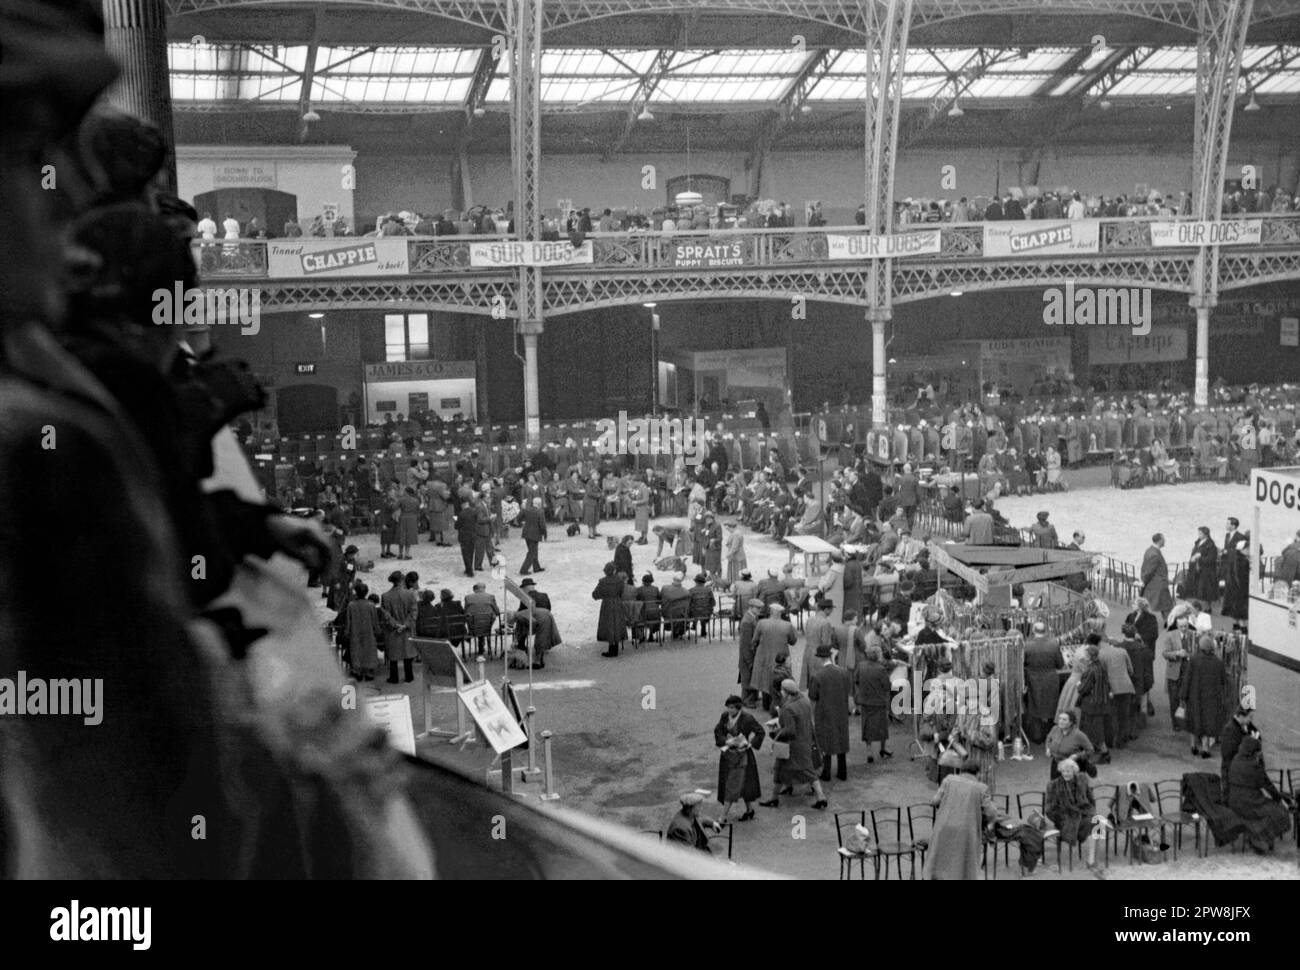 Crufts dog show in main hall at Olympia Exhibition Centre, London, England, UK c. 1950. Crufts is an annual international dog show, first held in 1891. Dogs are being judged (centre left) and banners advertise dog-related goods from companies such as Spratts and Chappie. Organised by The Kennel Club, it is the largest show in the world. It is a championship conformation show for dogs, a large trade show of goods and services, plus competitions. The 1948 show was the first to be held at this venue. This image is from an old amateur 35mm negative – a vintage 1940s/50s photograph. Stock Photo